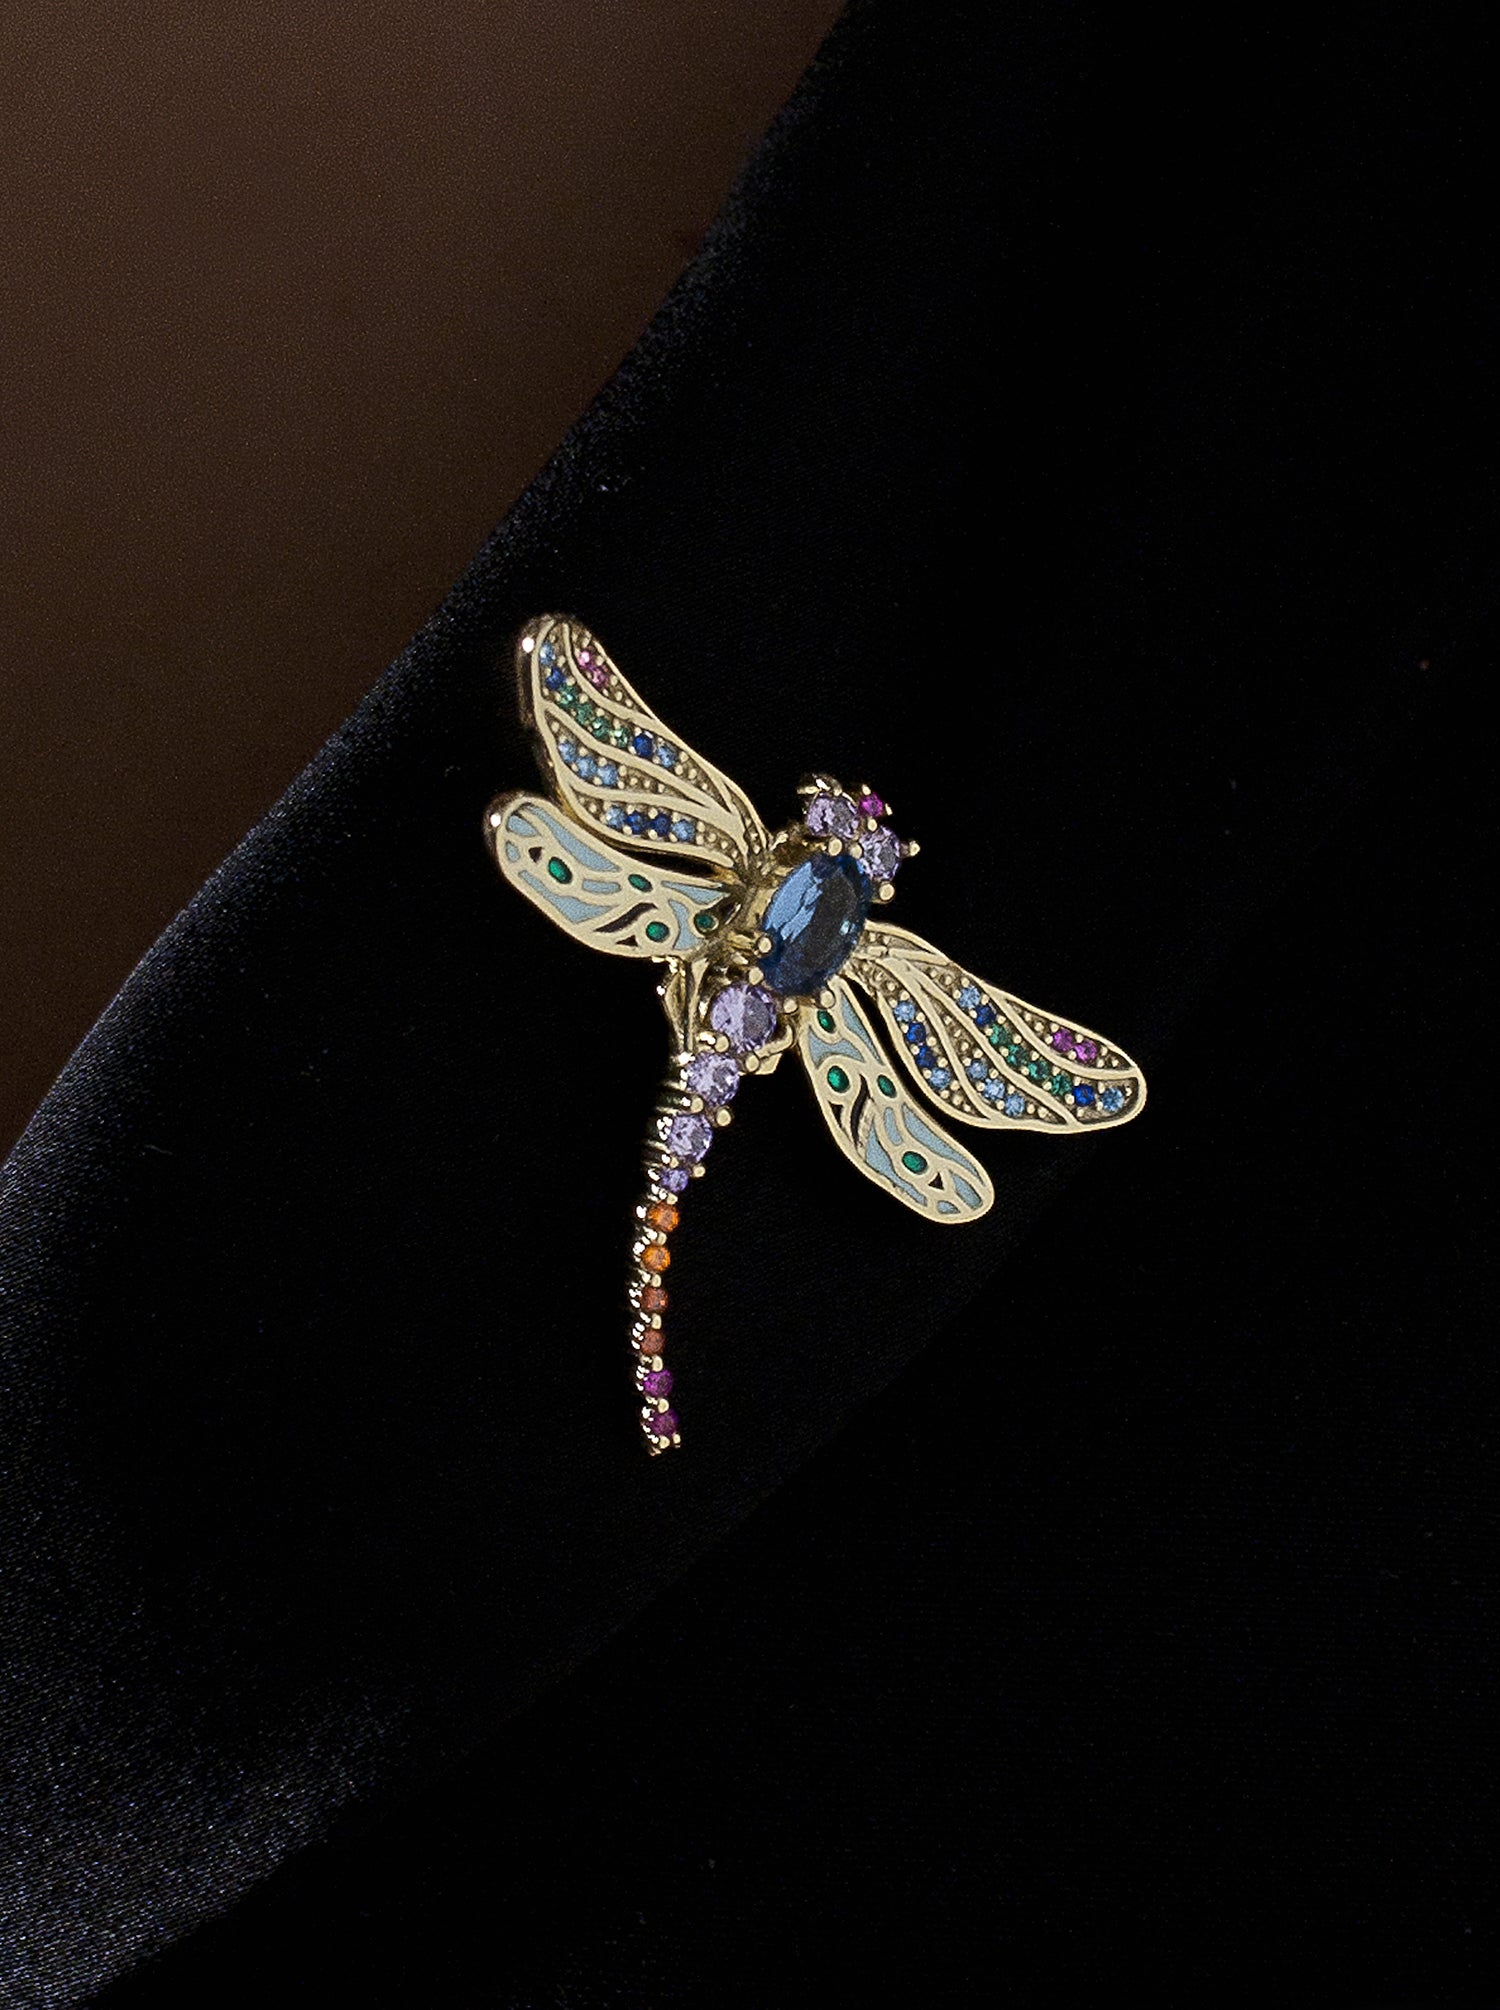 Silver brooch insect design in blue and violet tones